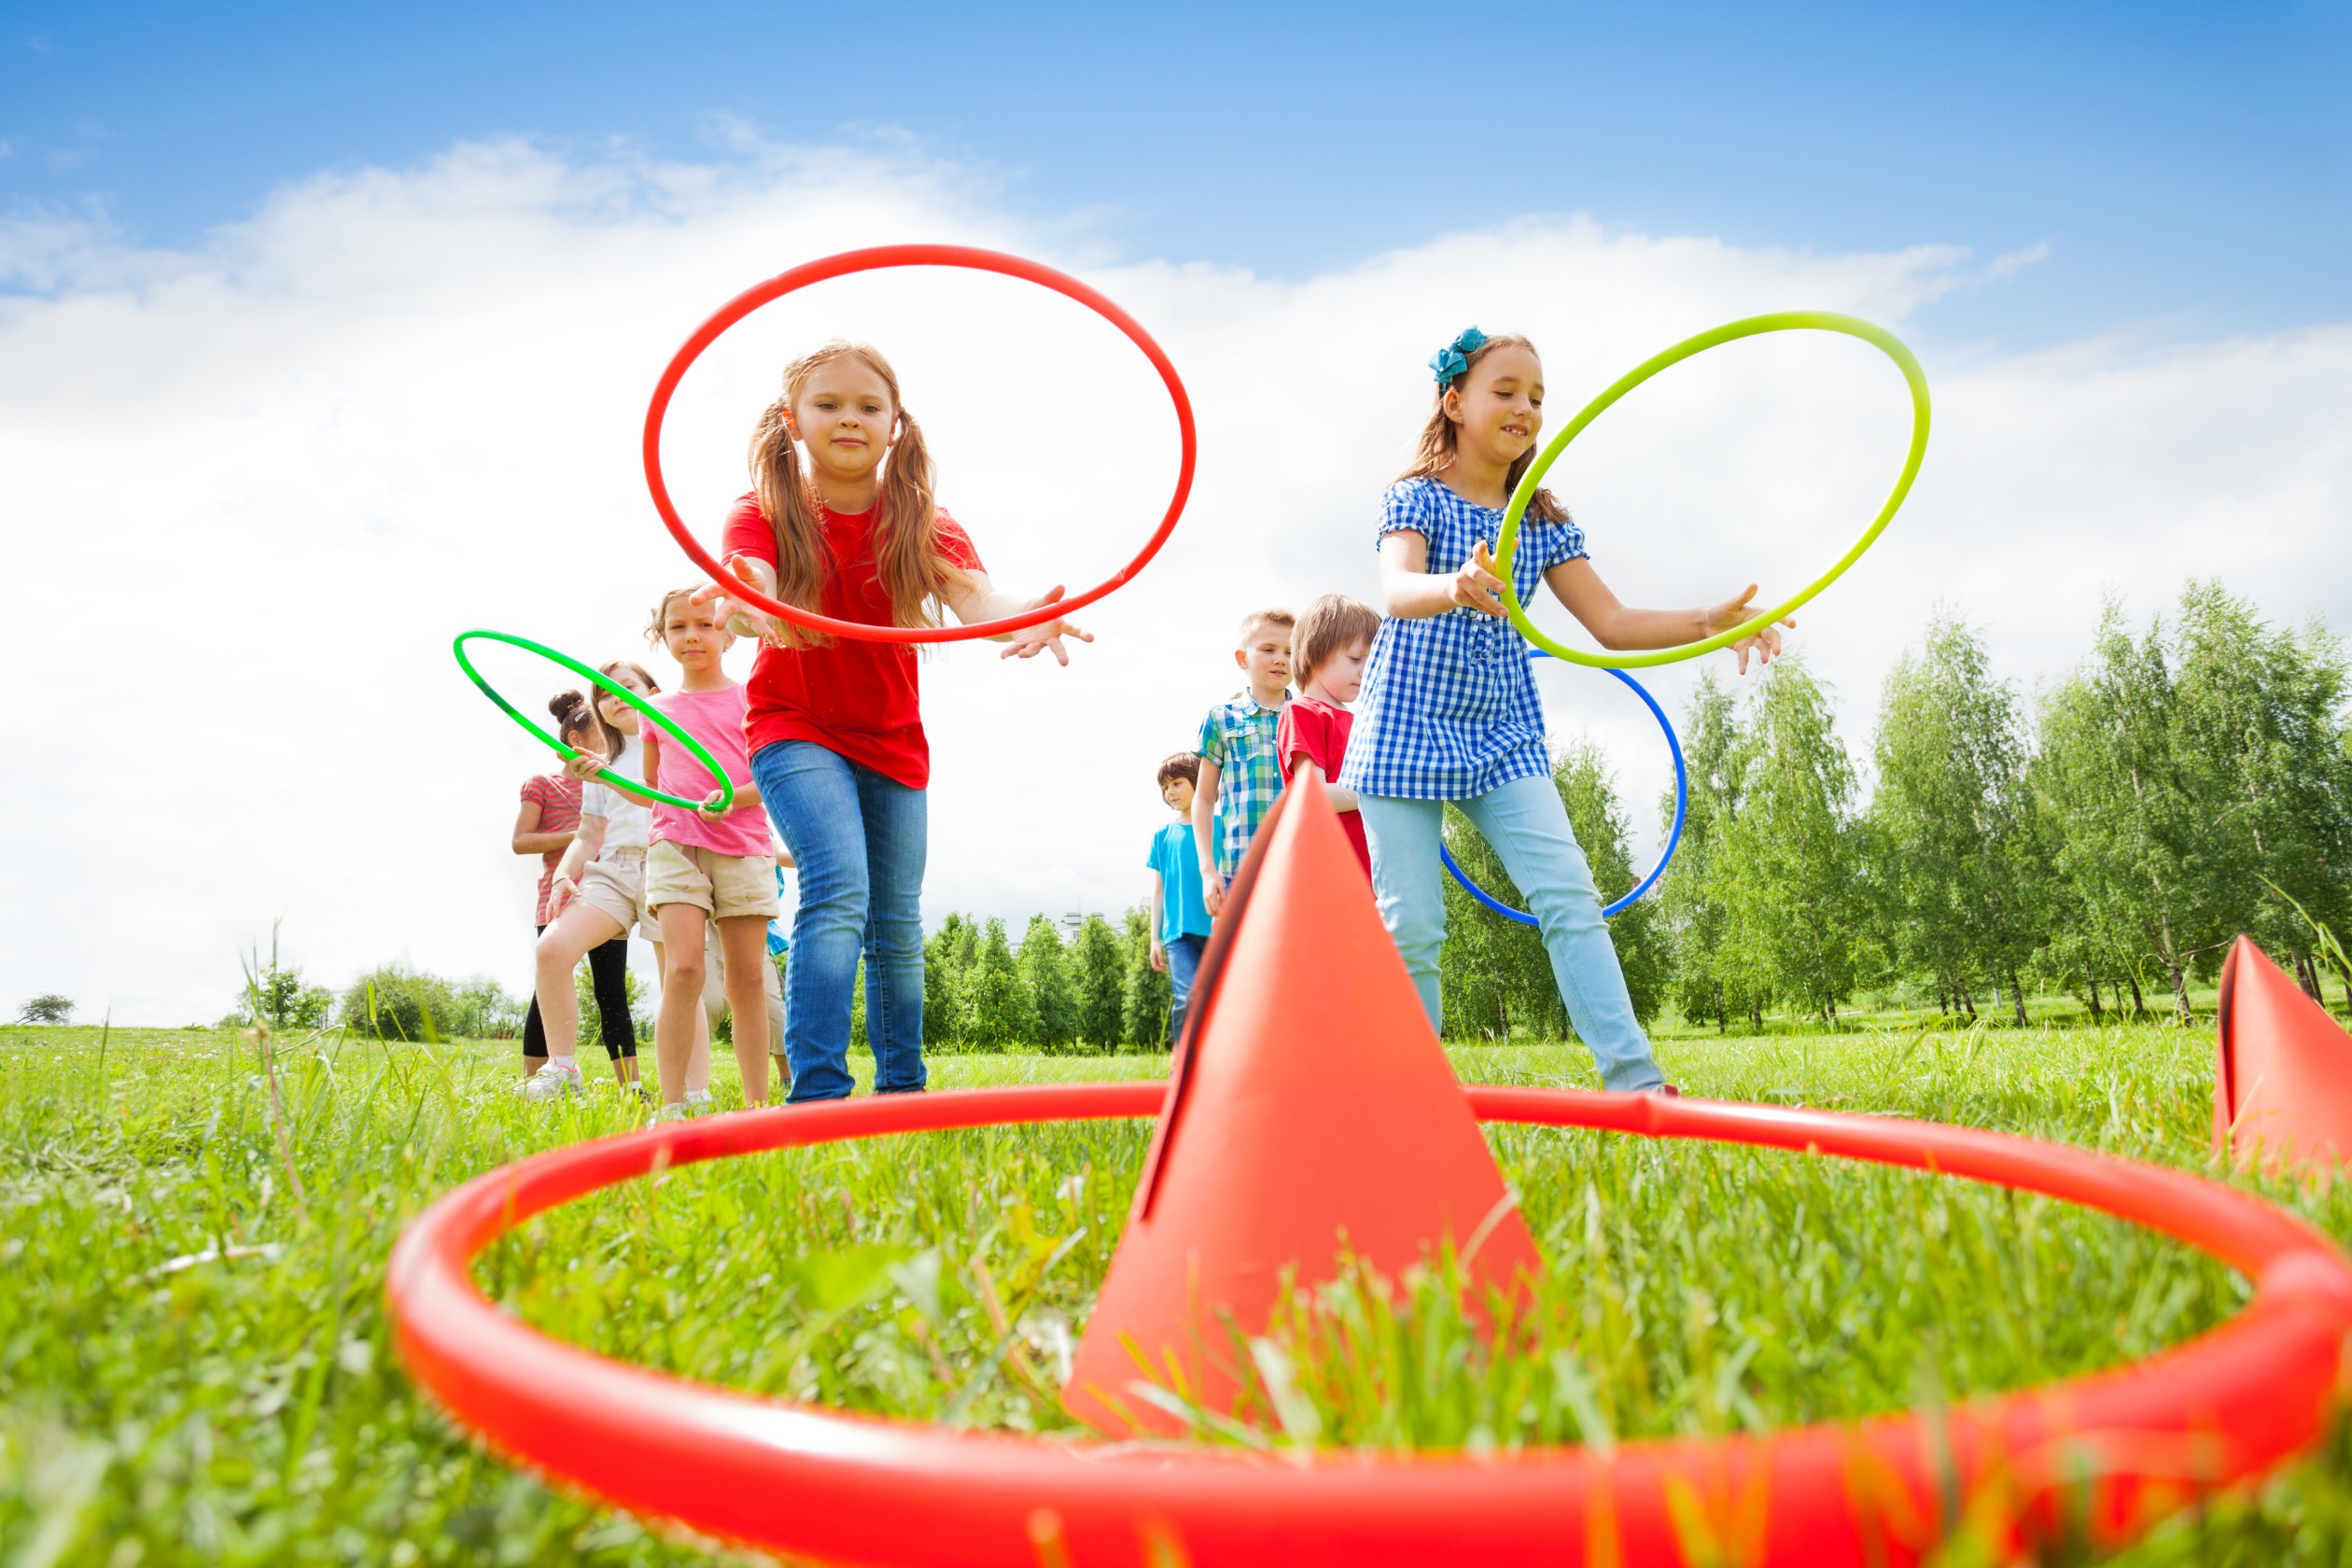 19 Outdoor Picnic Games For Your Next Gathering